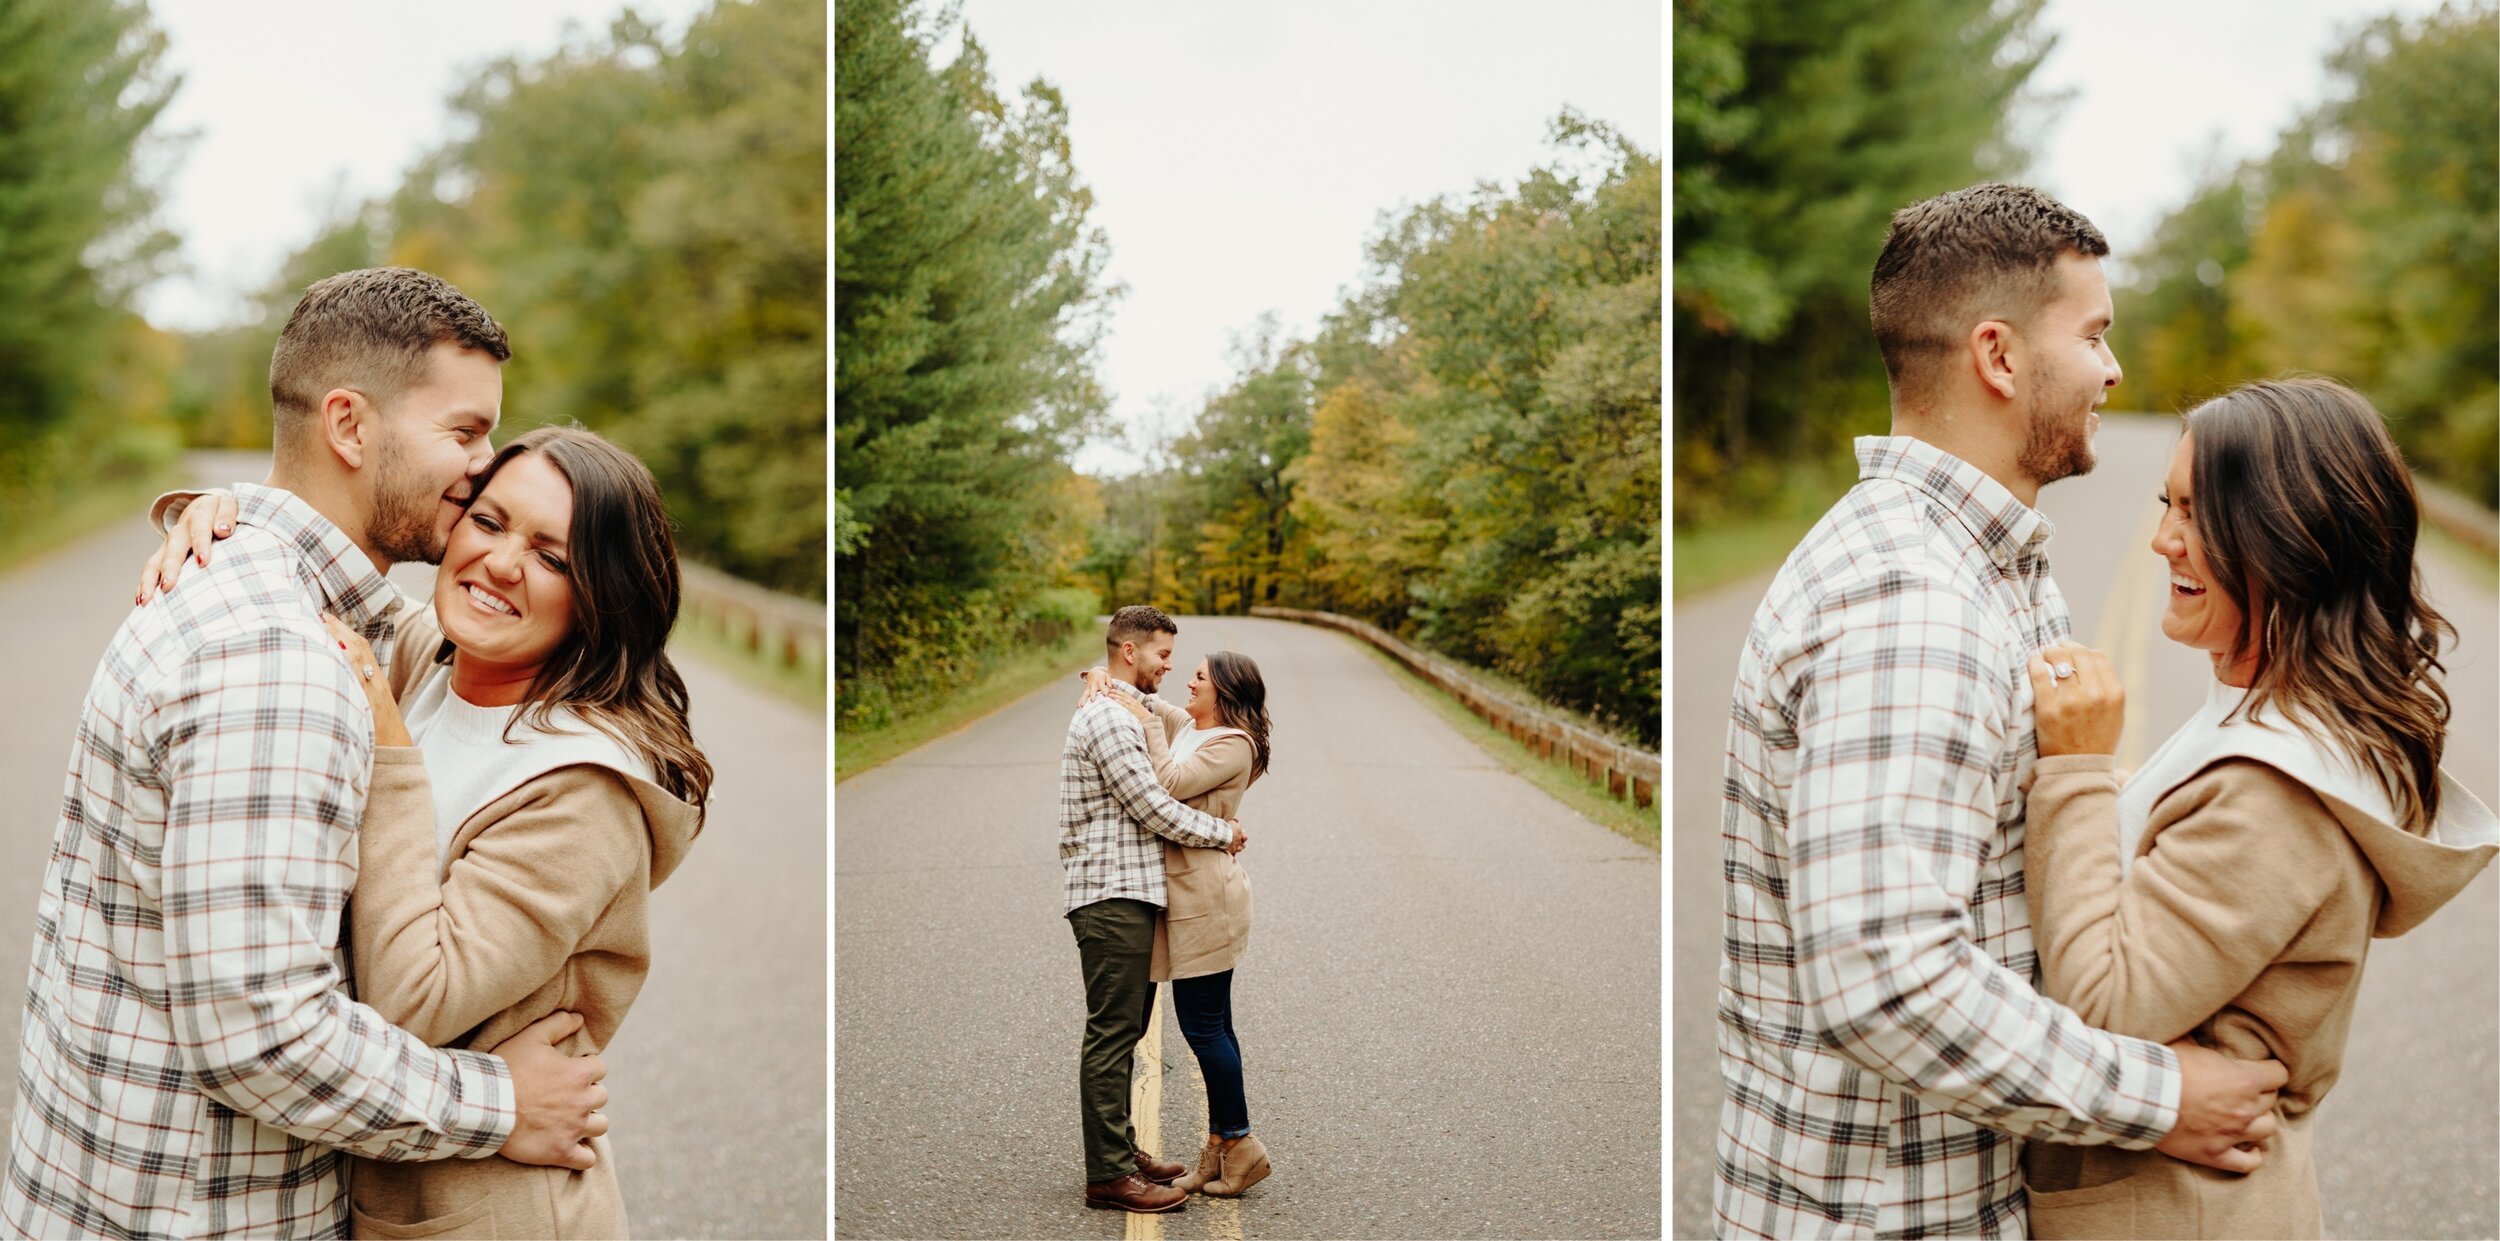 01_taylors-falls-engagement-session-interstate-park-mckenzie-josh-8_taylors-falls-engagement-session-interstate-park-mckenzie-josh-9_taylors-falls-engagement-session-interstate-park-mckenzie-josh-6.jpg